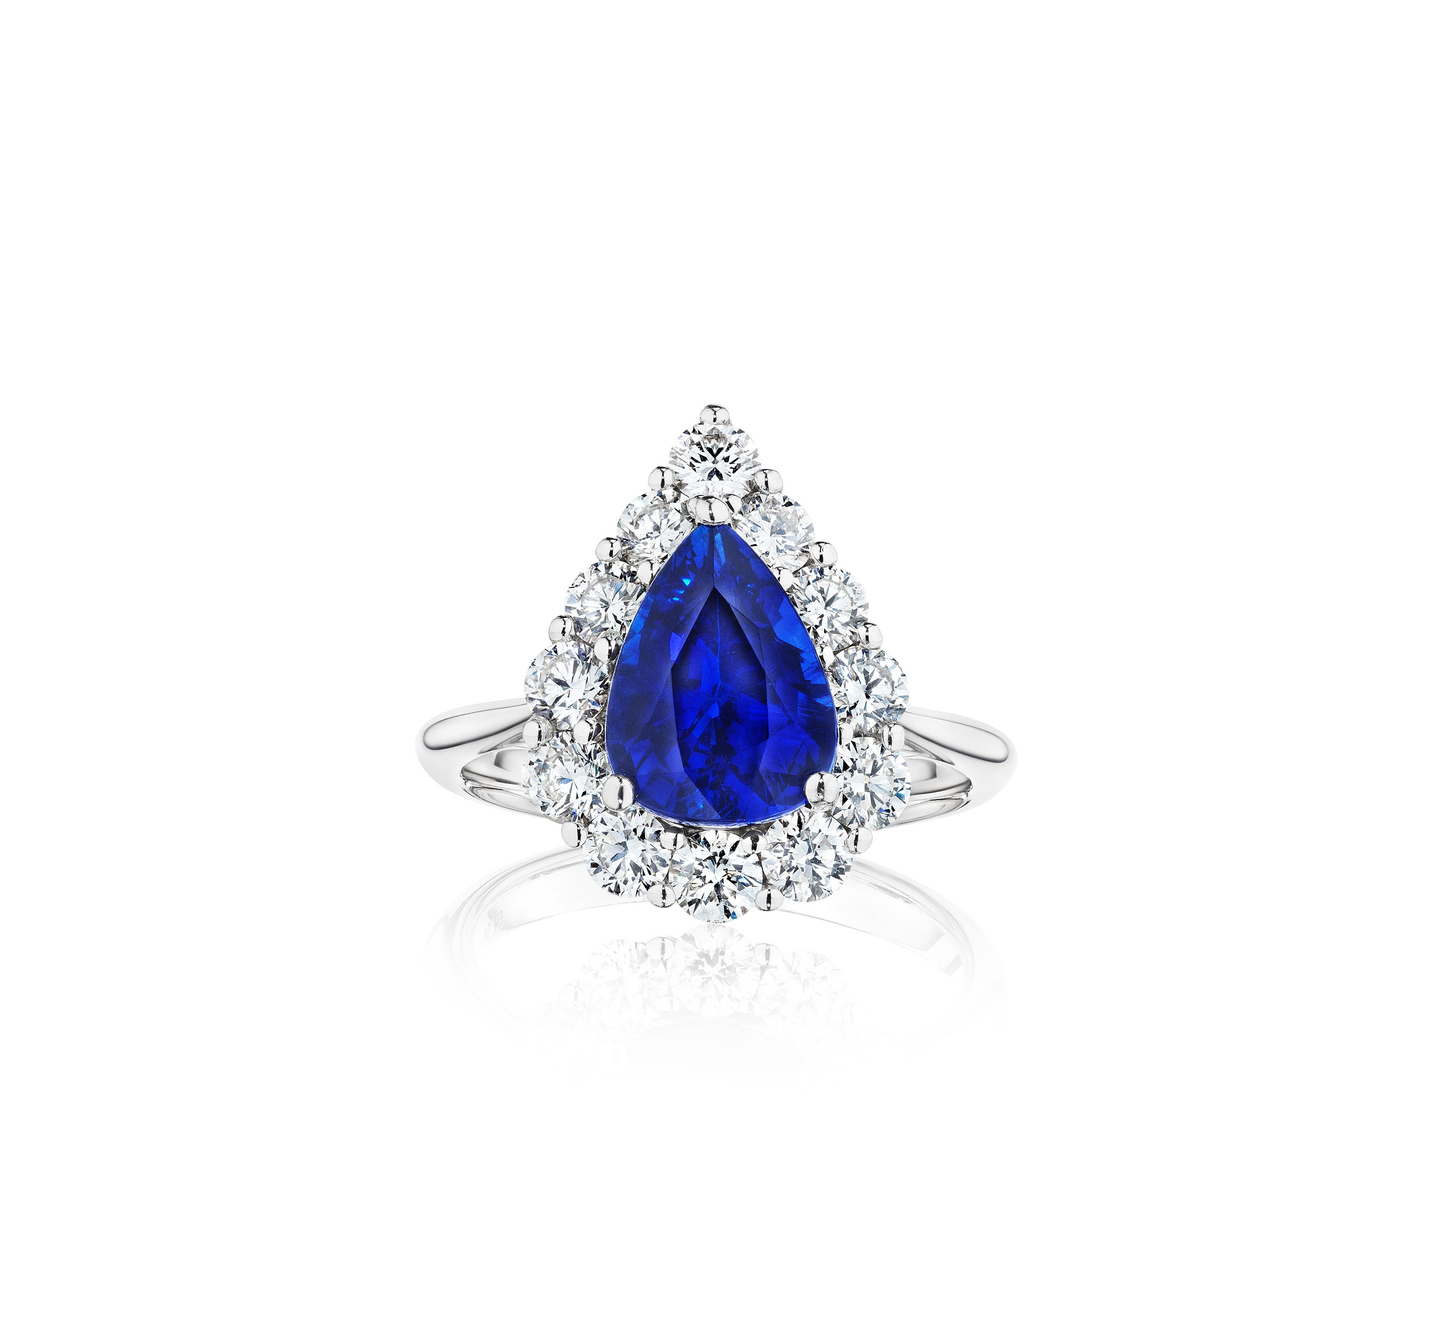 Sabel Collection White Gold Pear Shape Sapphire and Diamond Ring